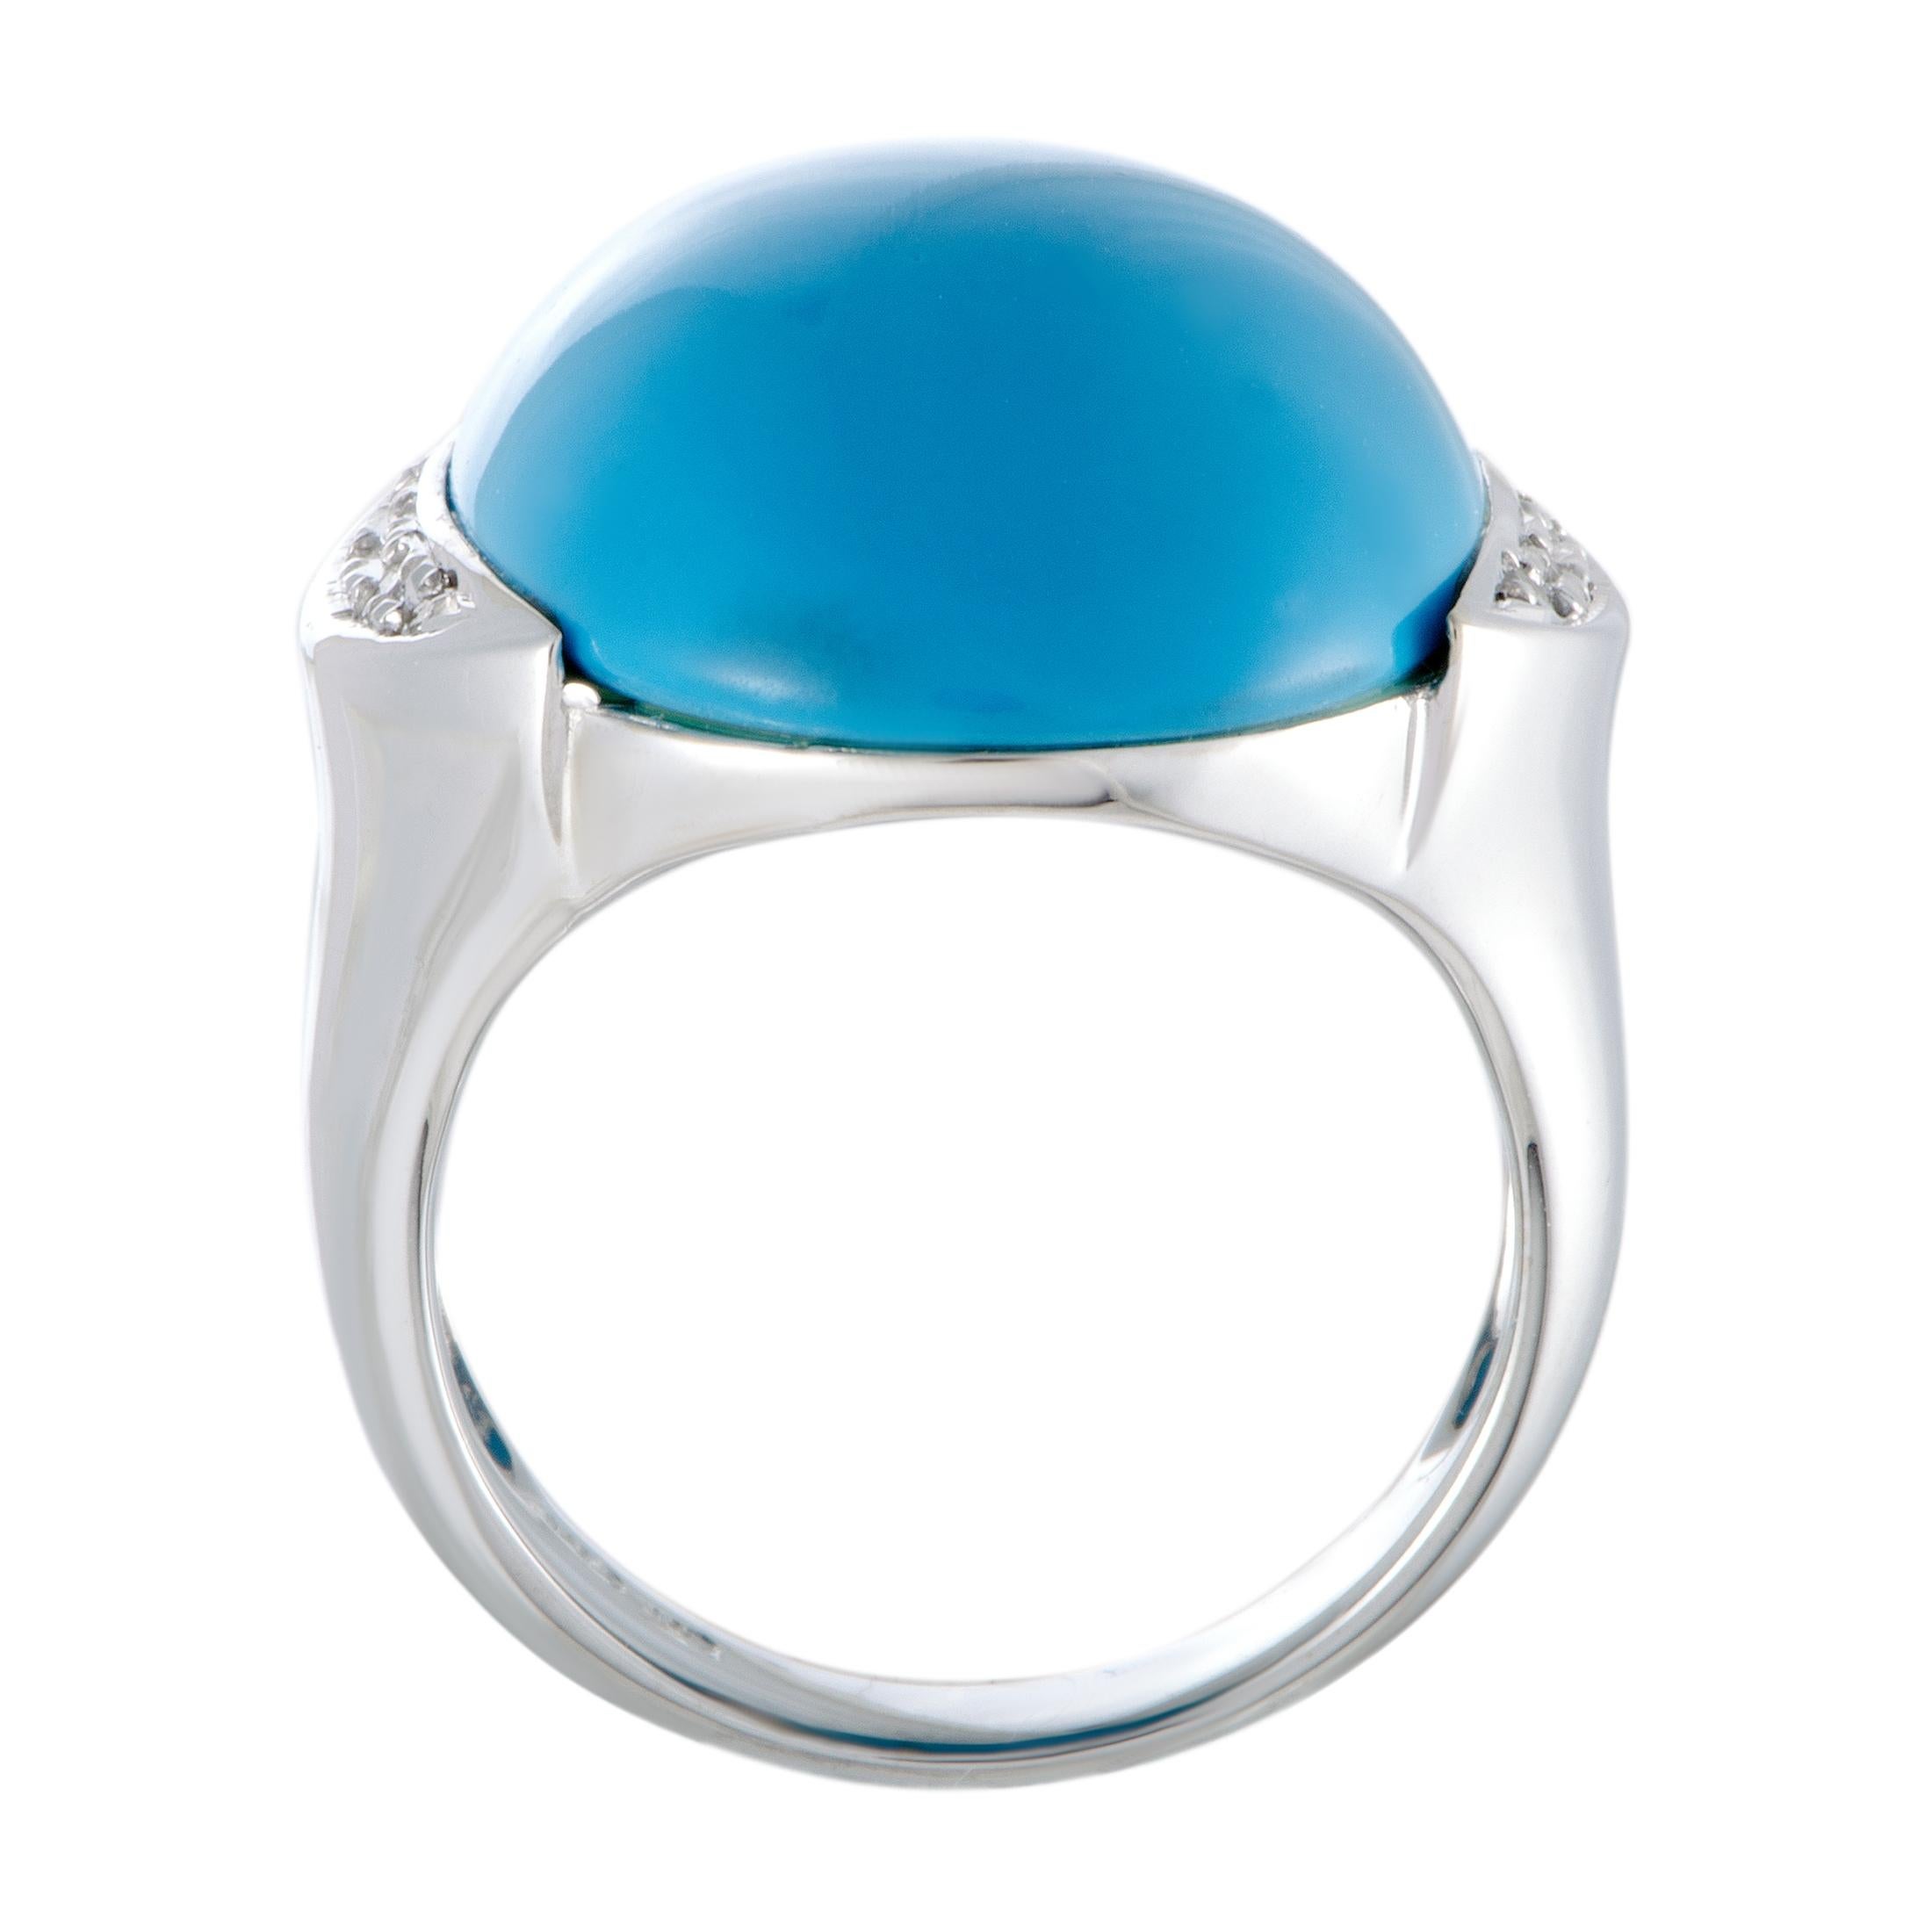 The sublime allure of the exquisitely cut turquoise steals the show in this fabulous ring that boasts a compellingly fashionable appeal. The ring is made of elegant 18K white gold and is also set with 0.08 carats of diamond stones.
Ring Top